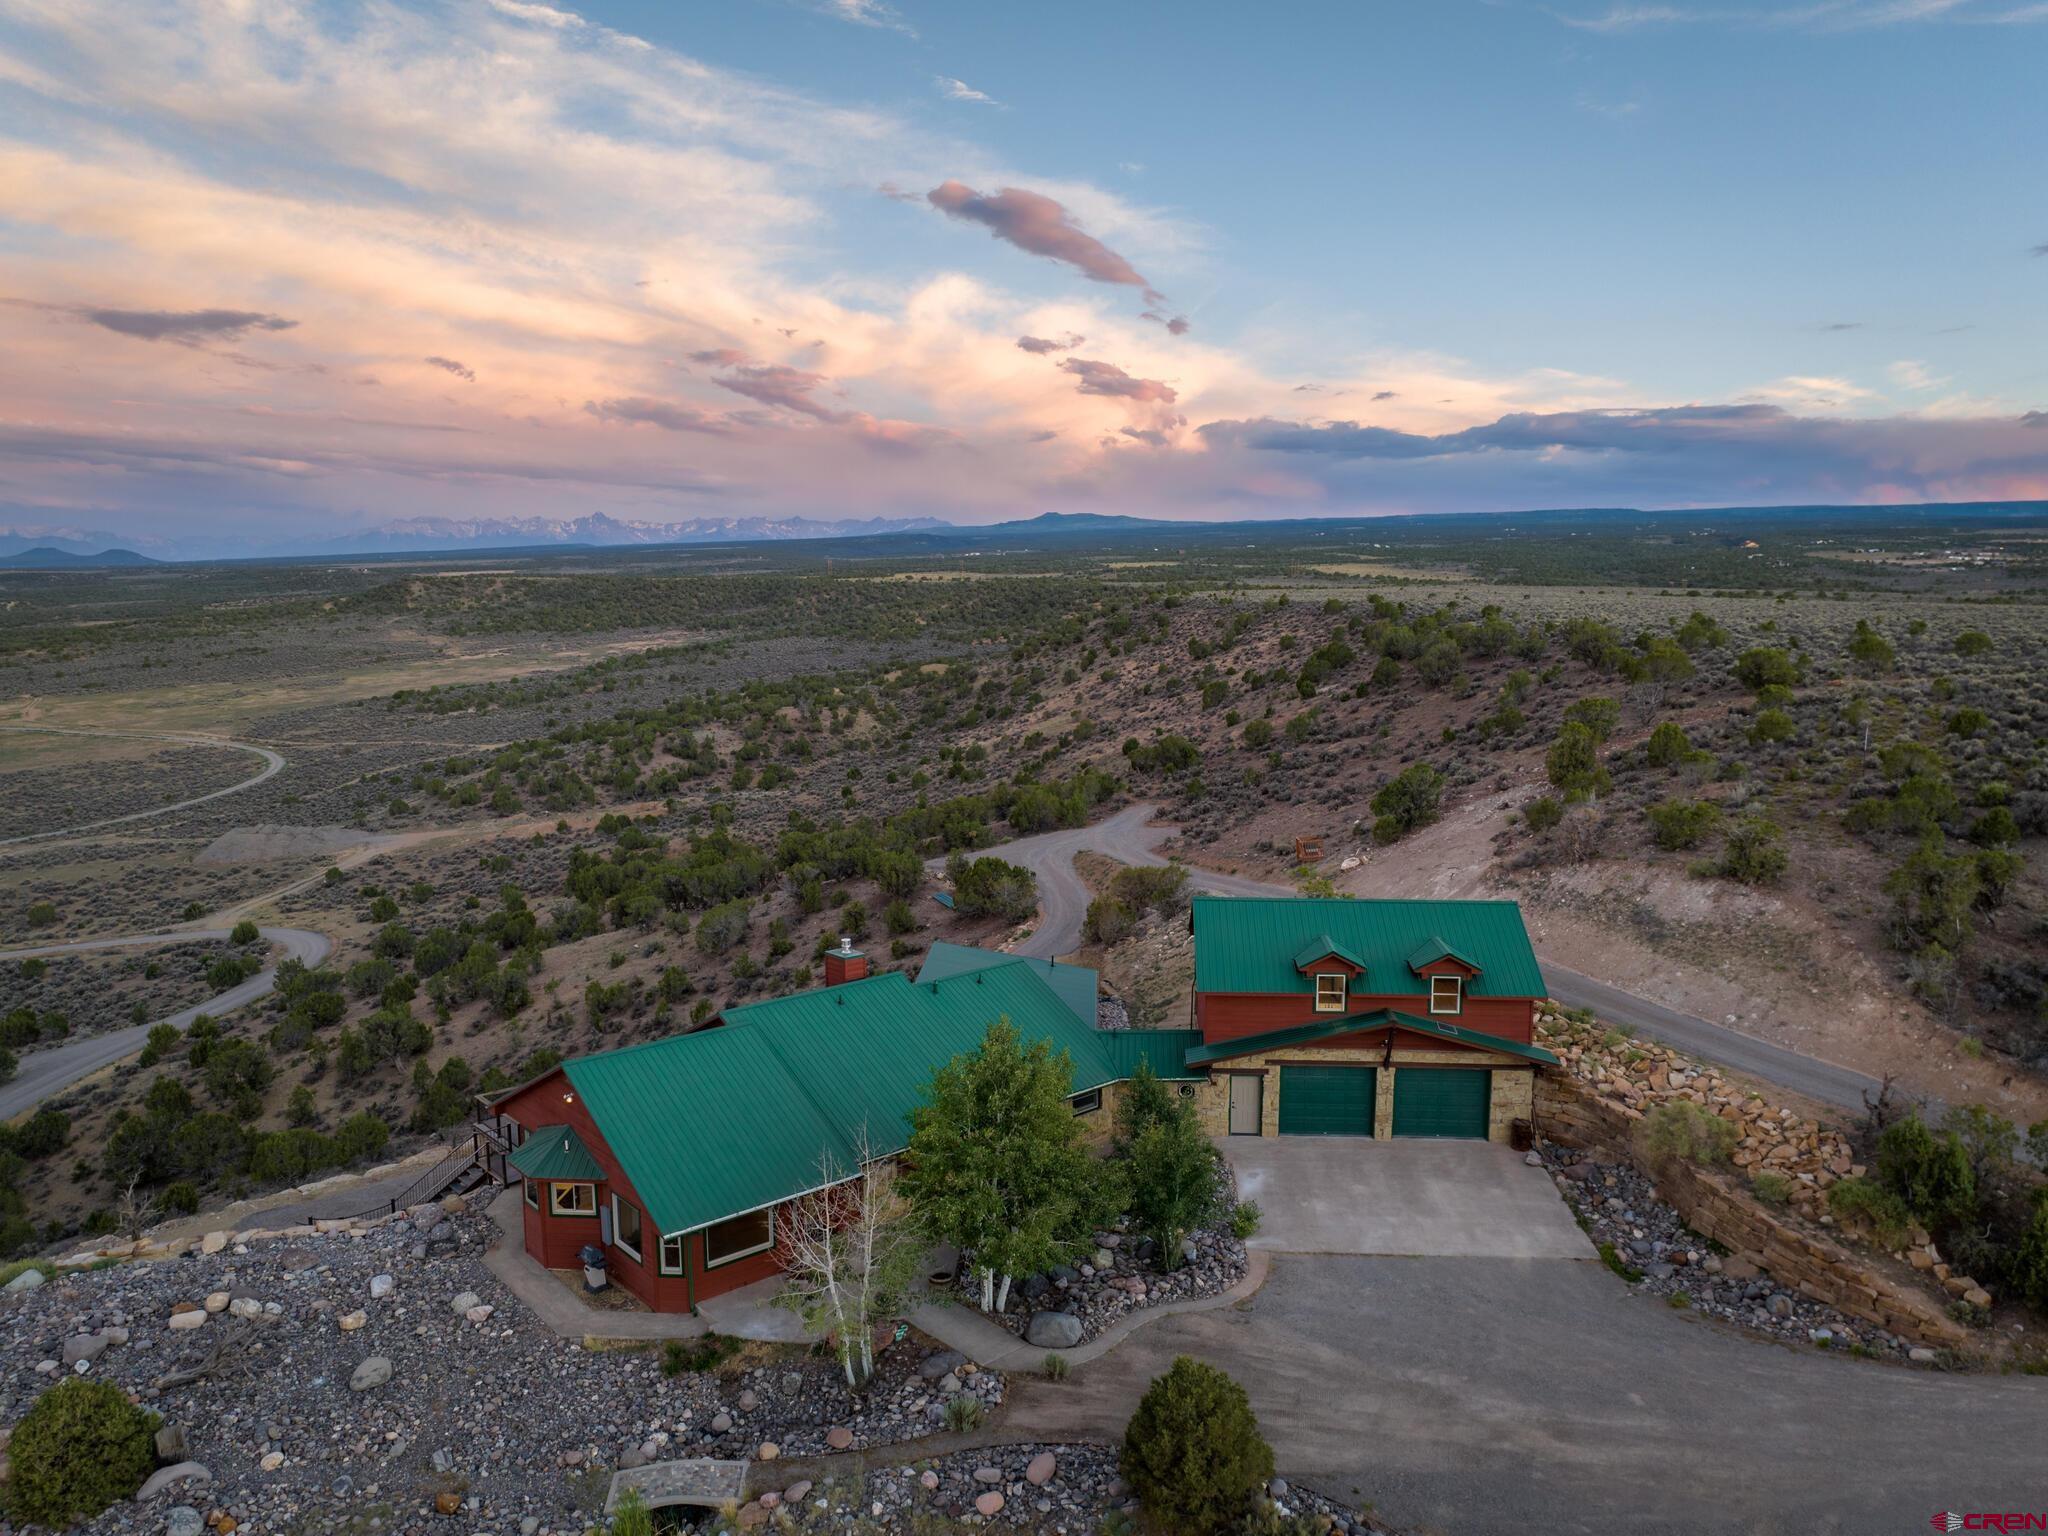 This home has truly some of the most spectacular views you can find within 10 minutes of downtown Montrose.  Very private.  Views from Sneffels to the Grand Mesa and evening lights of downtown.  15 private acres that border over 120,000 acres of BLM lands to the southwest. Calling all pilots! Tucked into a private valley with an airstrip and large acre homesites.  The home was a complete remodel in 2022 and is being sold unfurnished.  There is a large Shop/RV storage/workshop.  Loads of parking and land for further use.  The home has ample storage, a couple of flex rooms for a studio, game room, etc. Truly a must see for the Buyer looking for one of the finest homes in town and flexibility to create your family program on site.